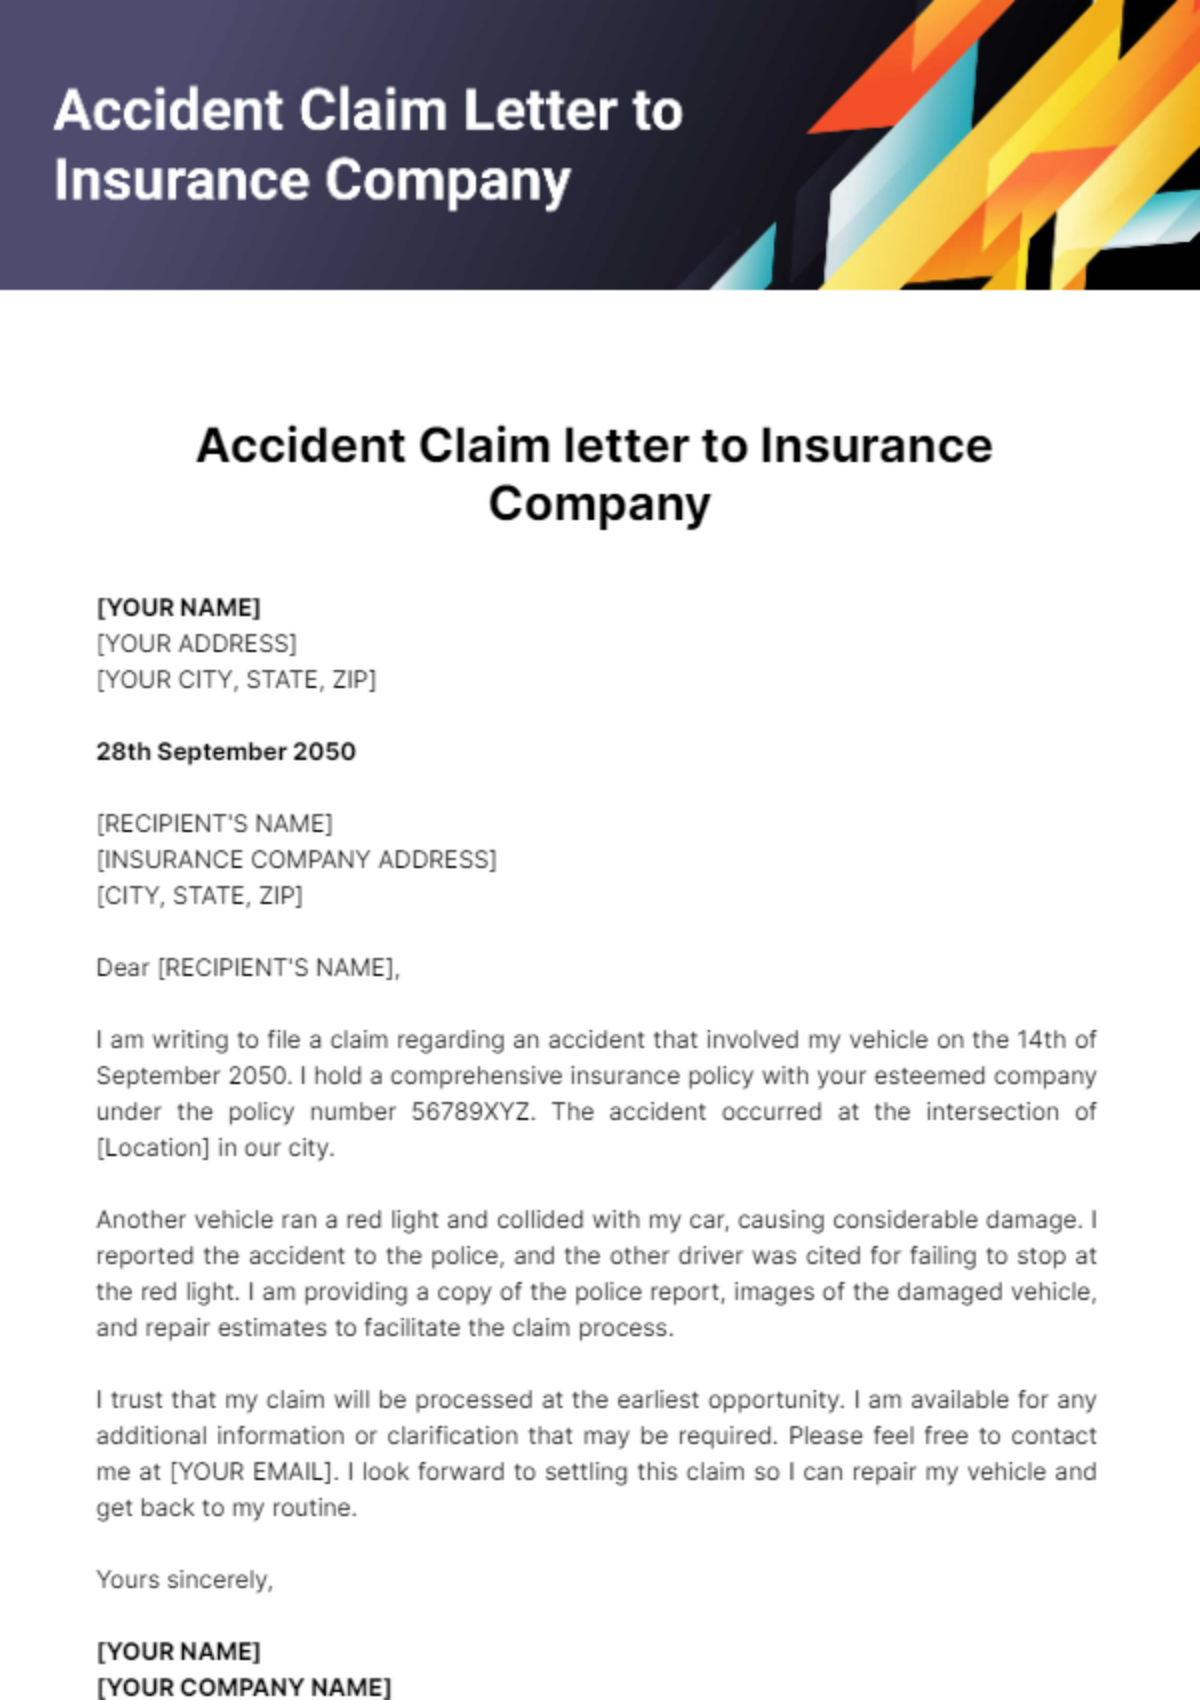 Accident Claim letter to Insurance Company Template